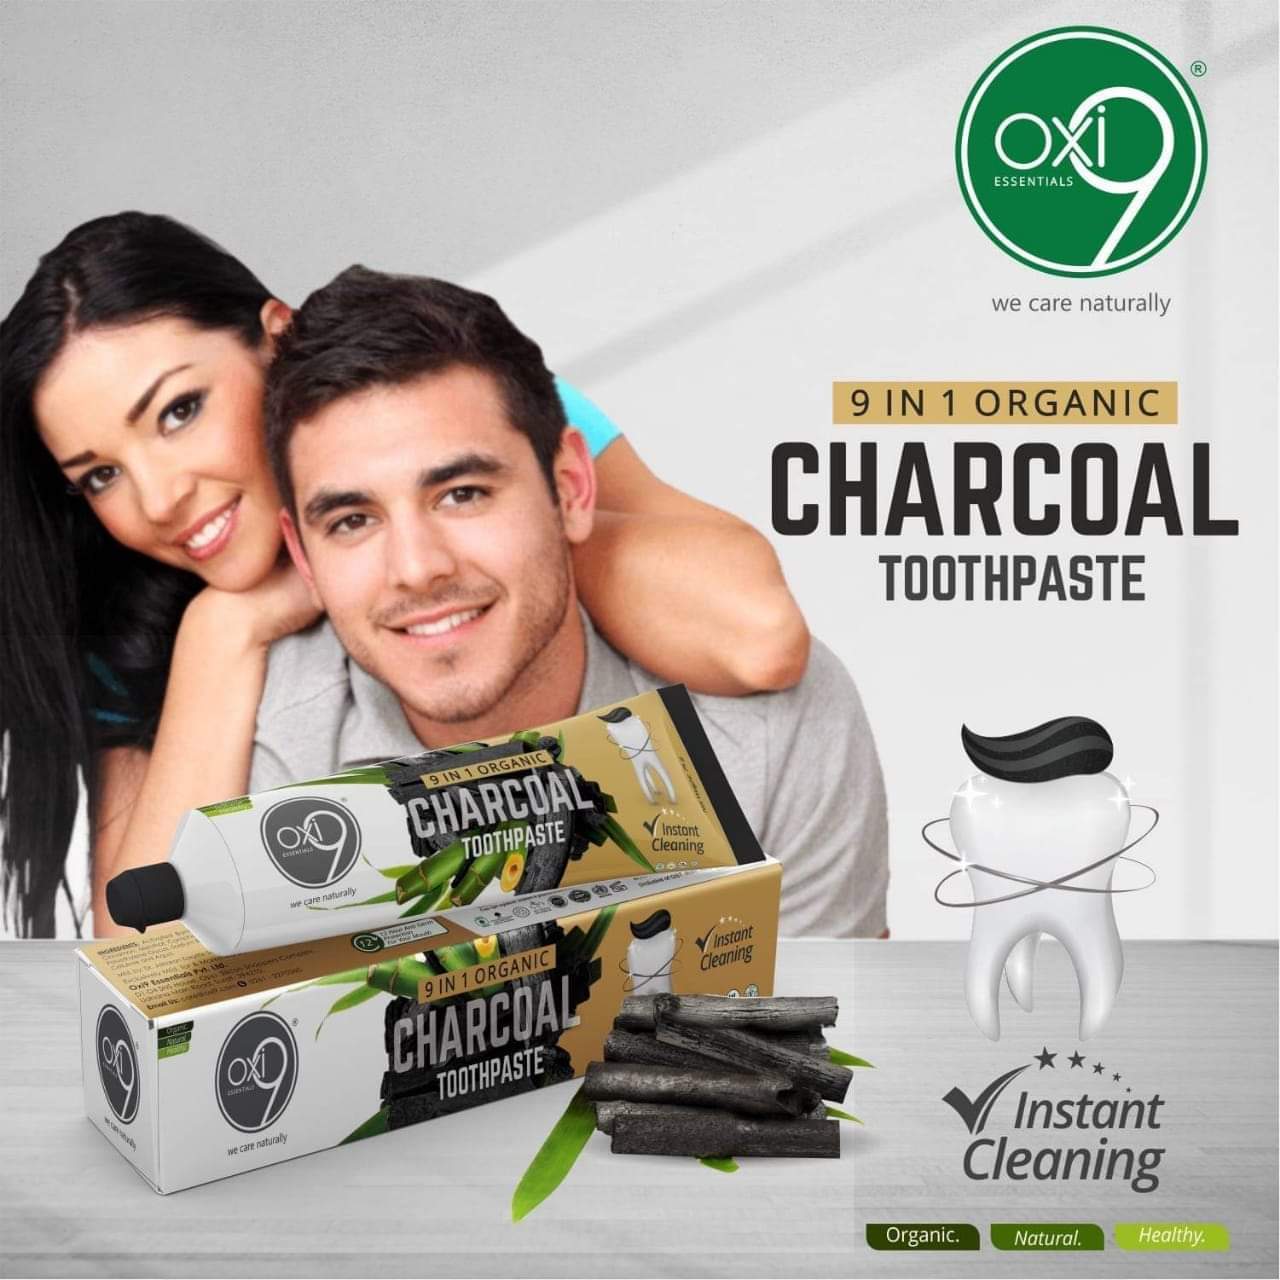 9 in 1 Organic Charcoal Toothpaste